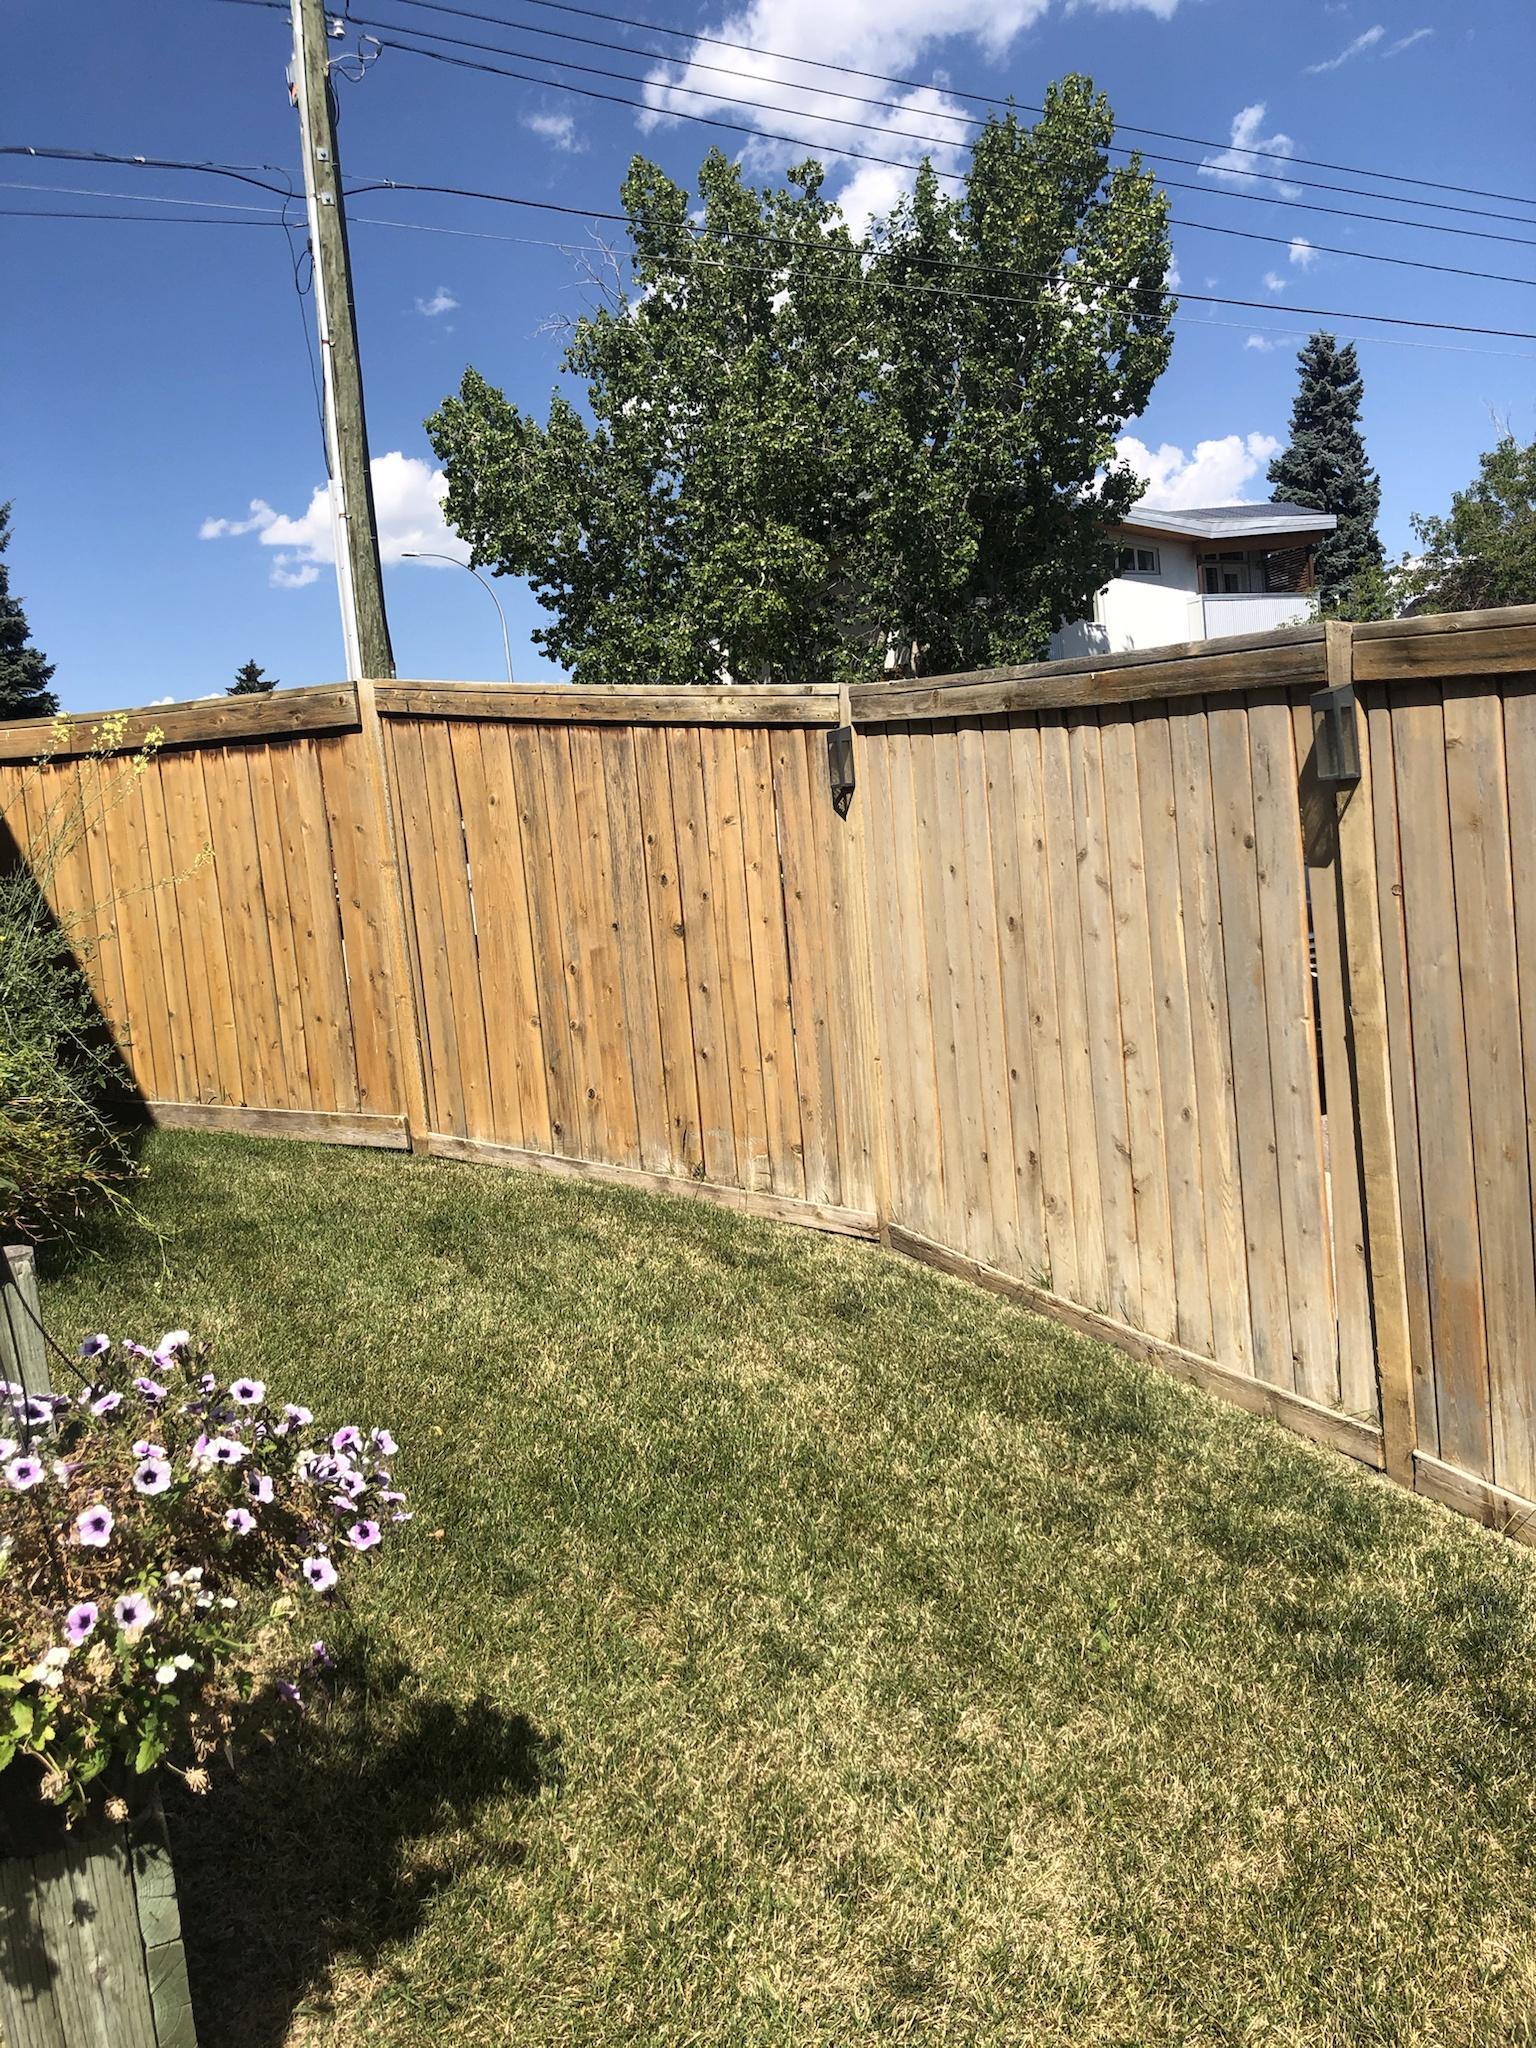 How to Properly Maintain Your Fence